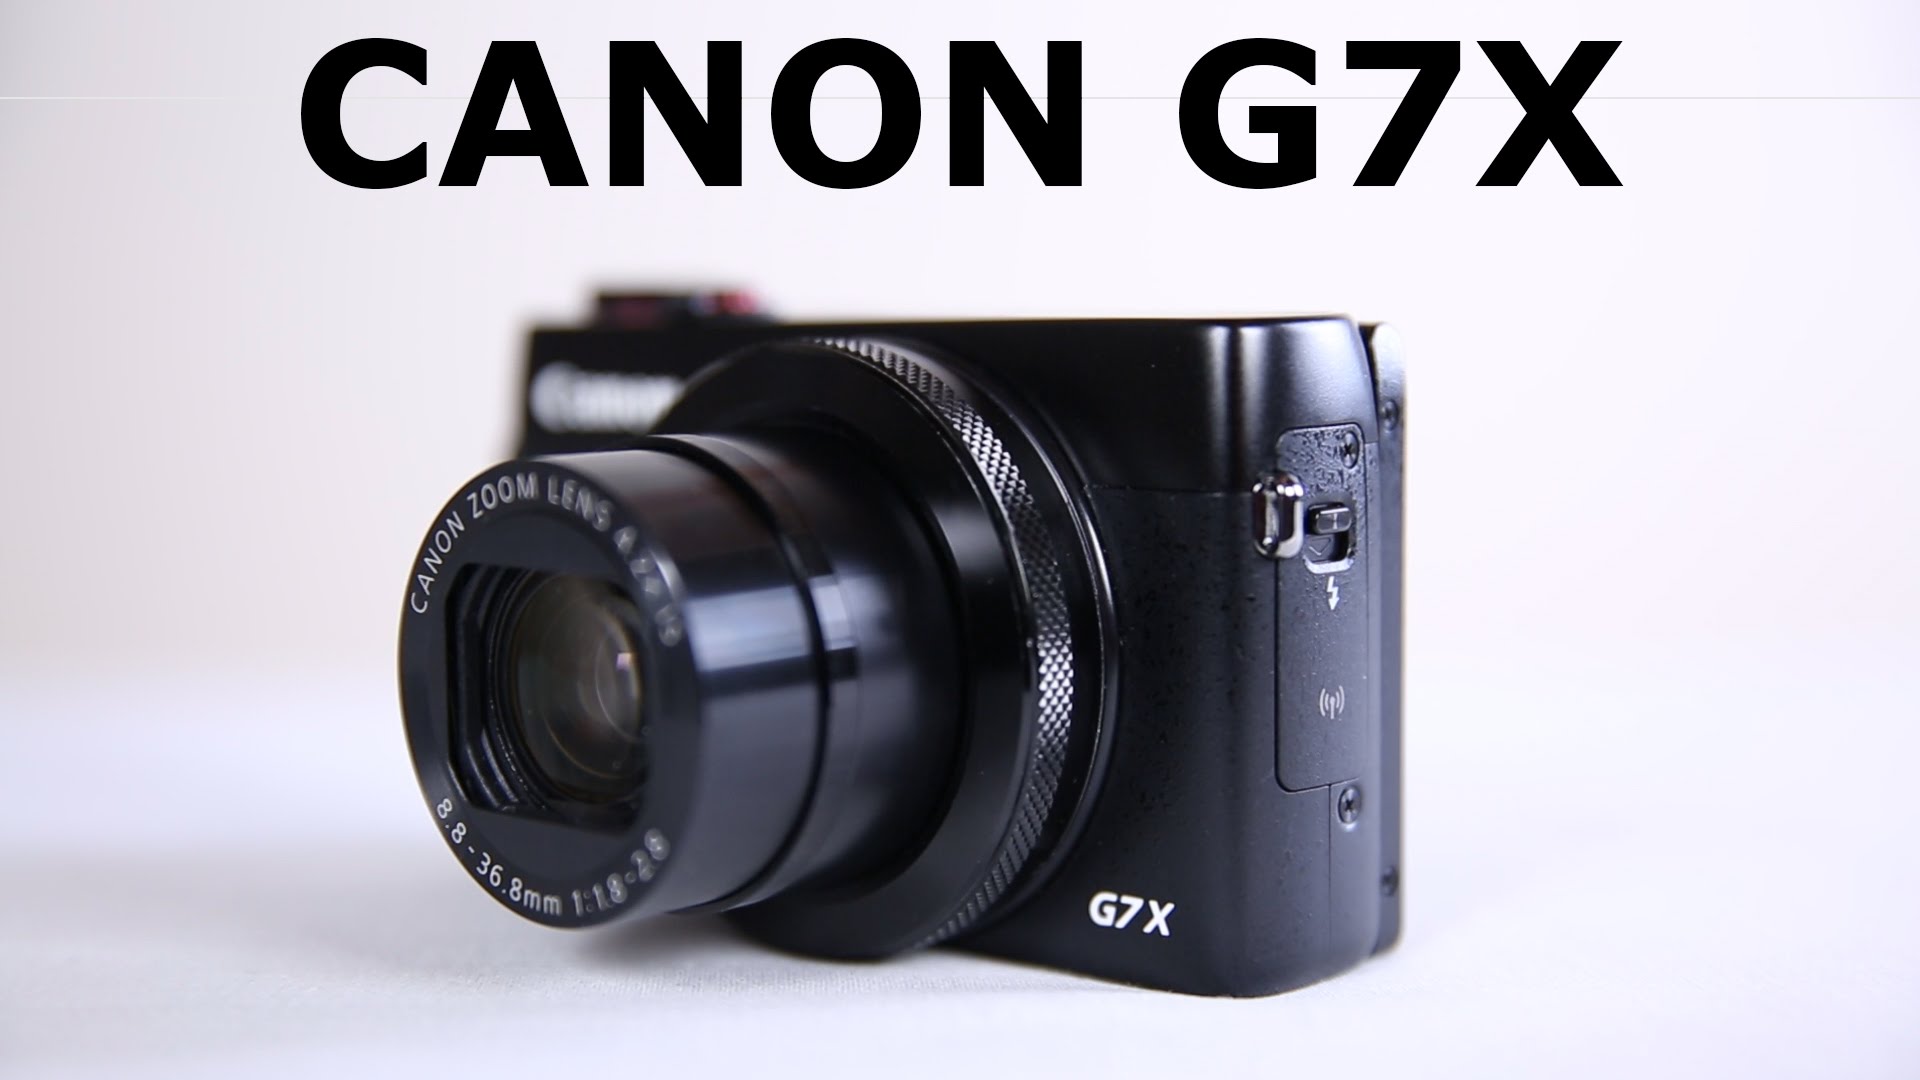 Canon PowerShot G7X Hands On Review